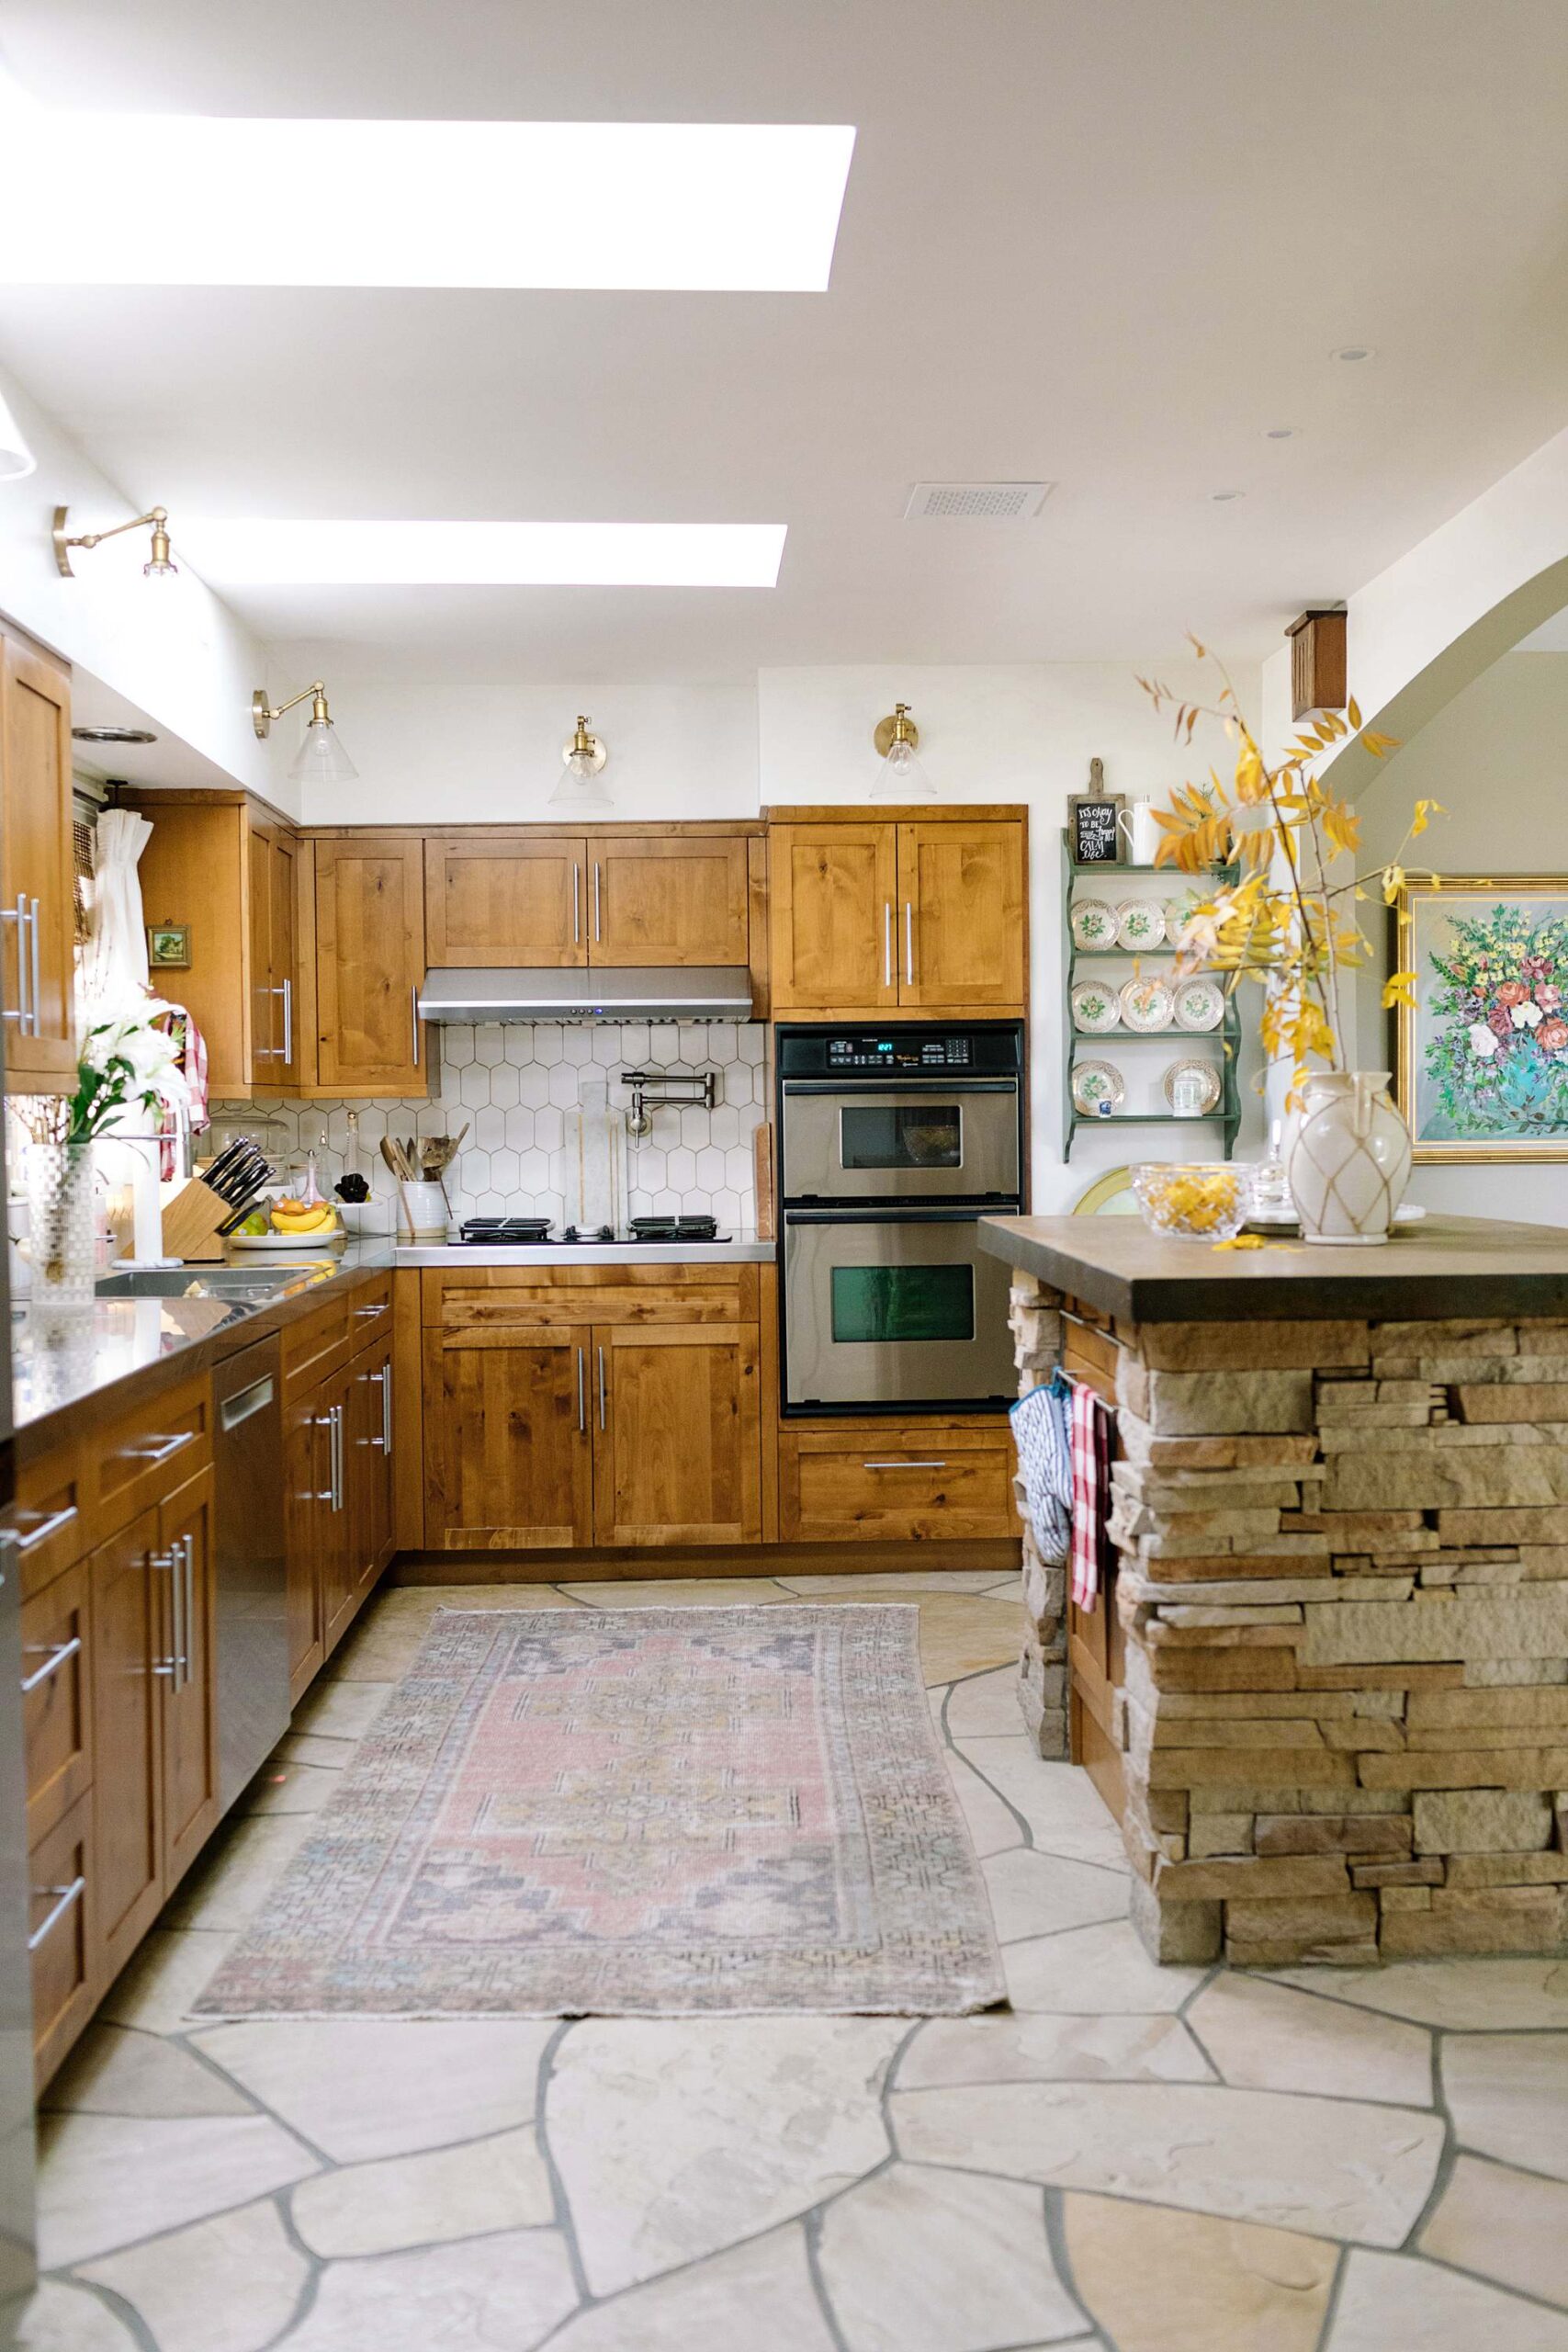 kitchen wall sconces clear glass flagstone floors, natural wood stained cabinets shaker style